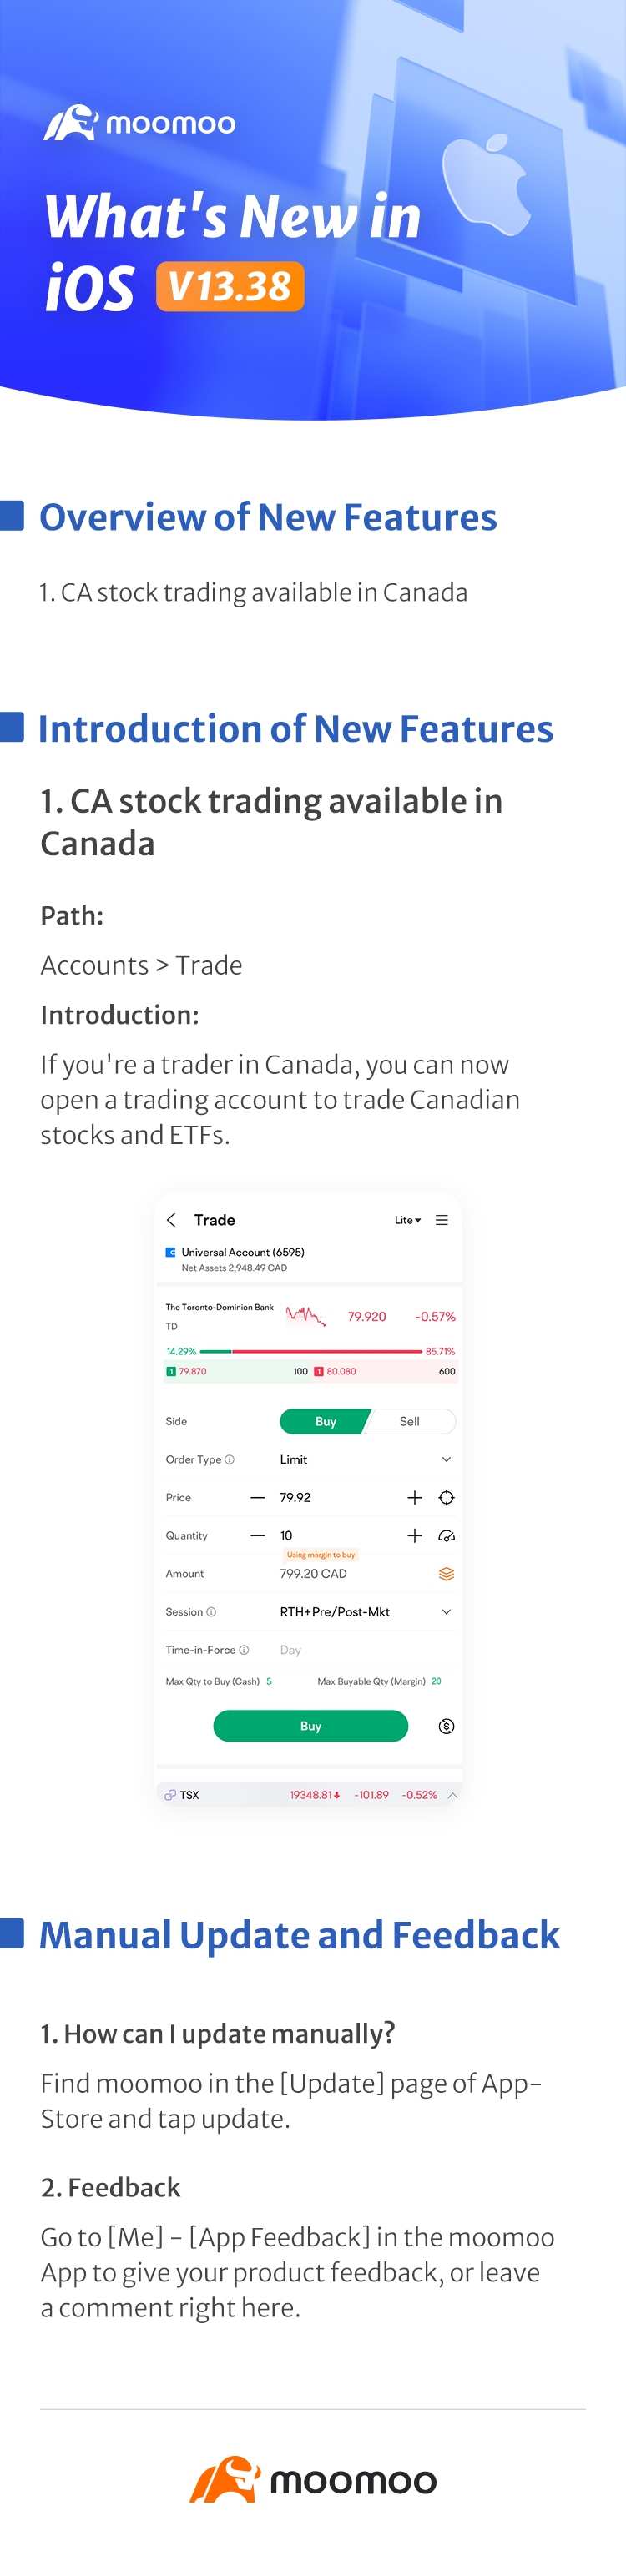 What's New: CA stock trading available in Canada in iOS v13.38